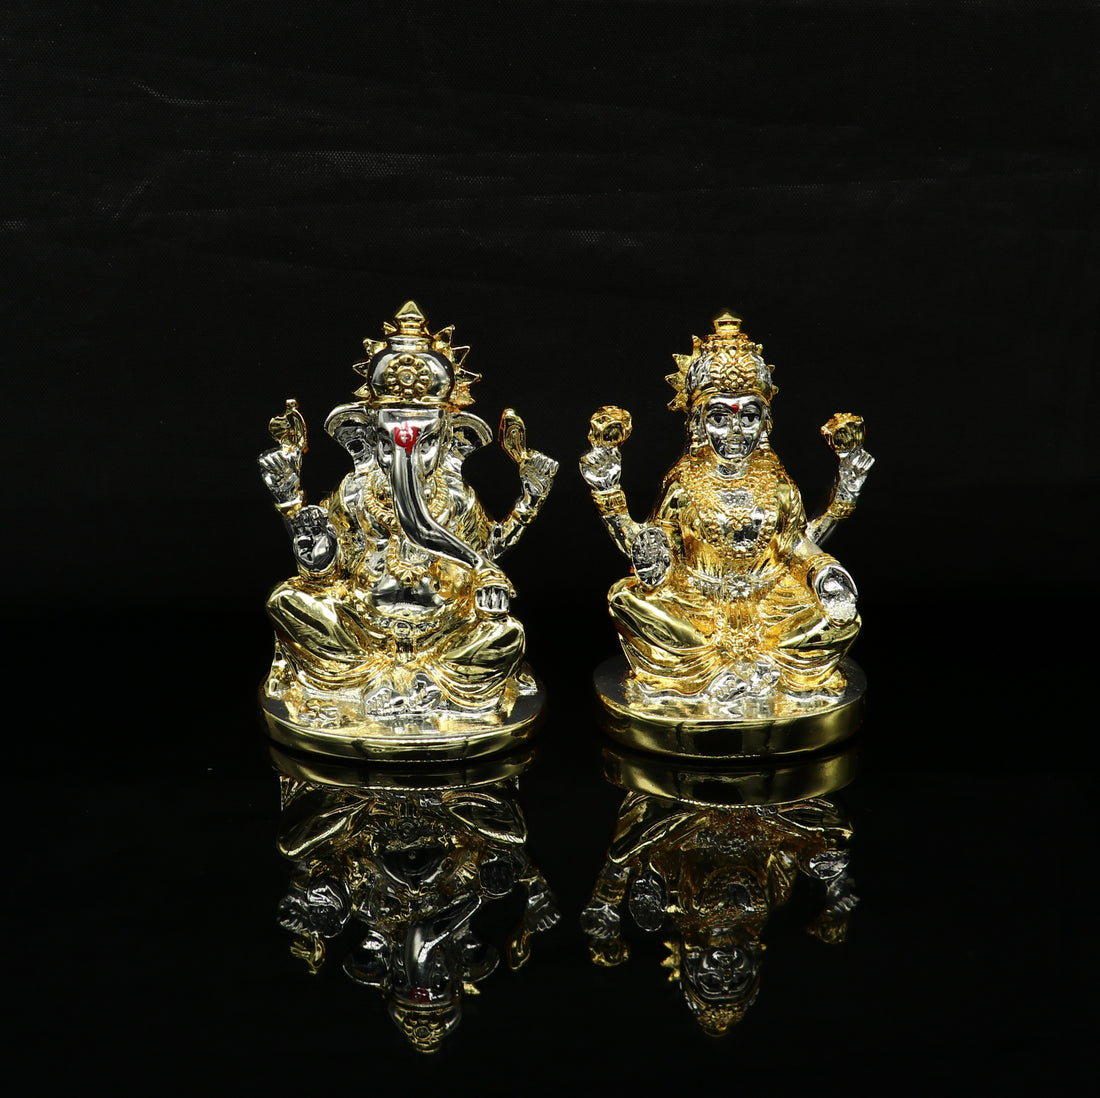 Goddess Laxmi or lord Ganesha Outside Gold or Silver Covering Inside Wax and Marble Silver Idol W7 - TRIBAL ORNAMENTS